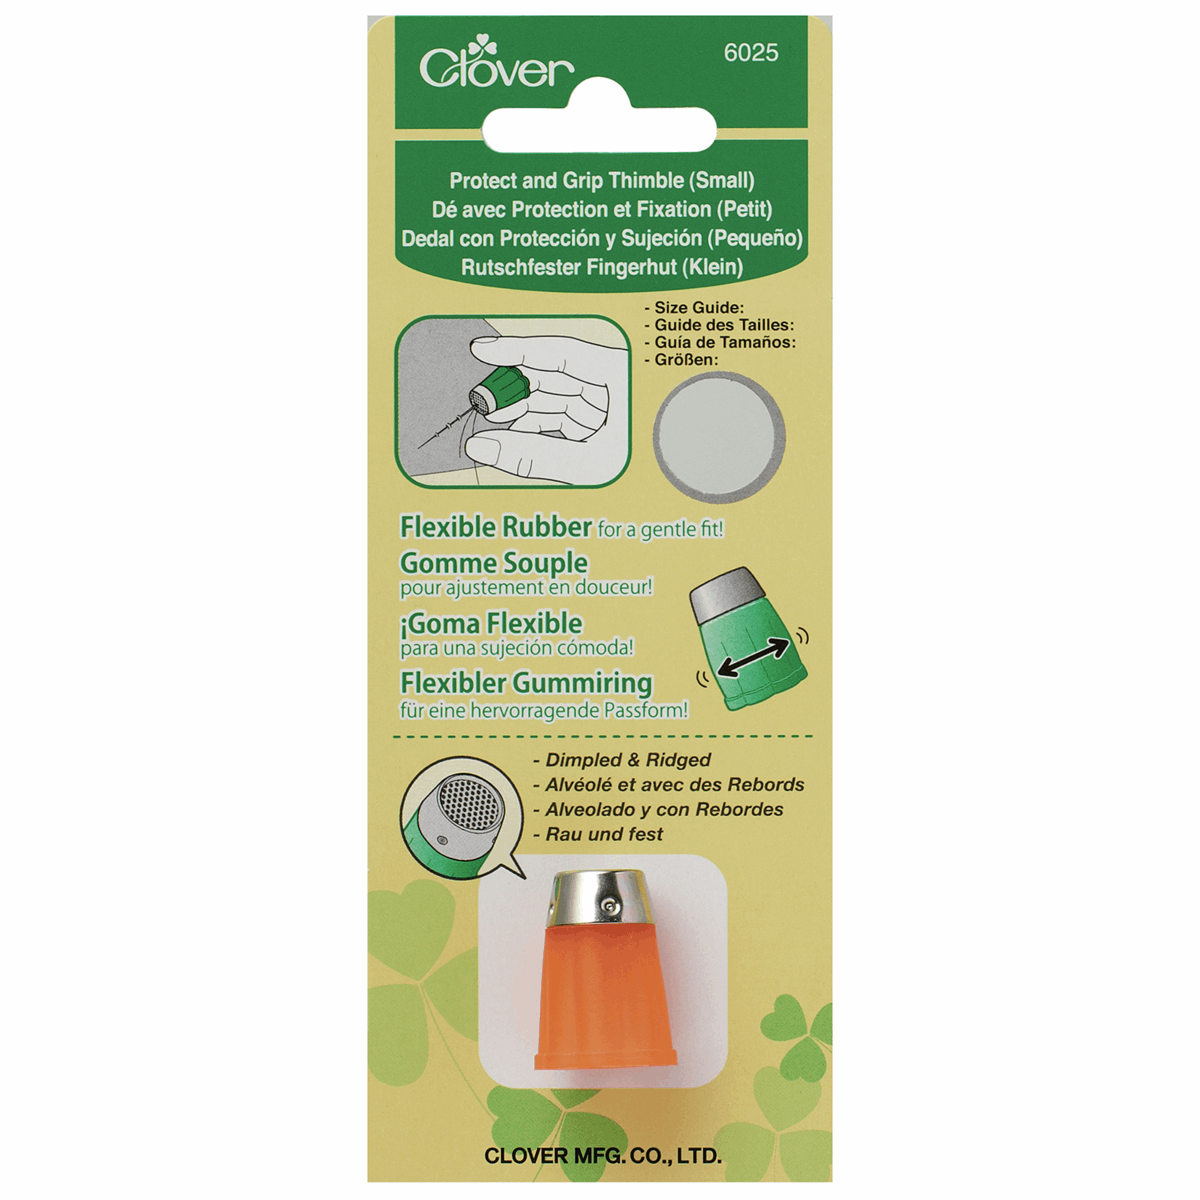 Clover Thimble Protect and Grip